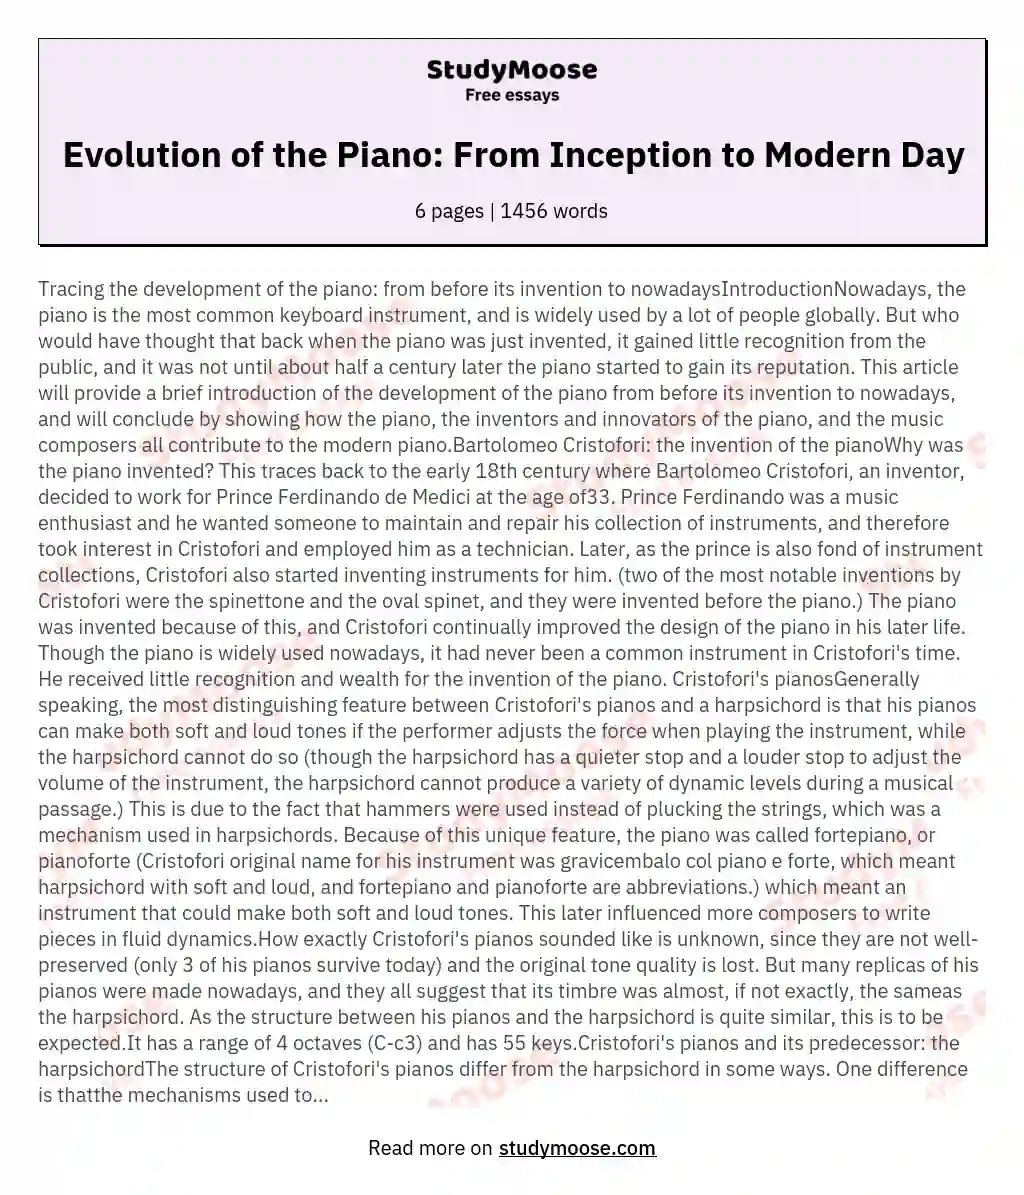 Evolution of the Piano: From Inception to Modern Day essay